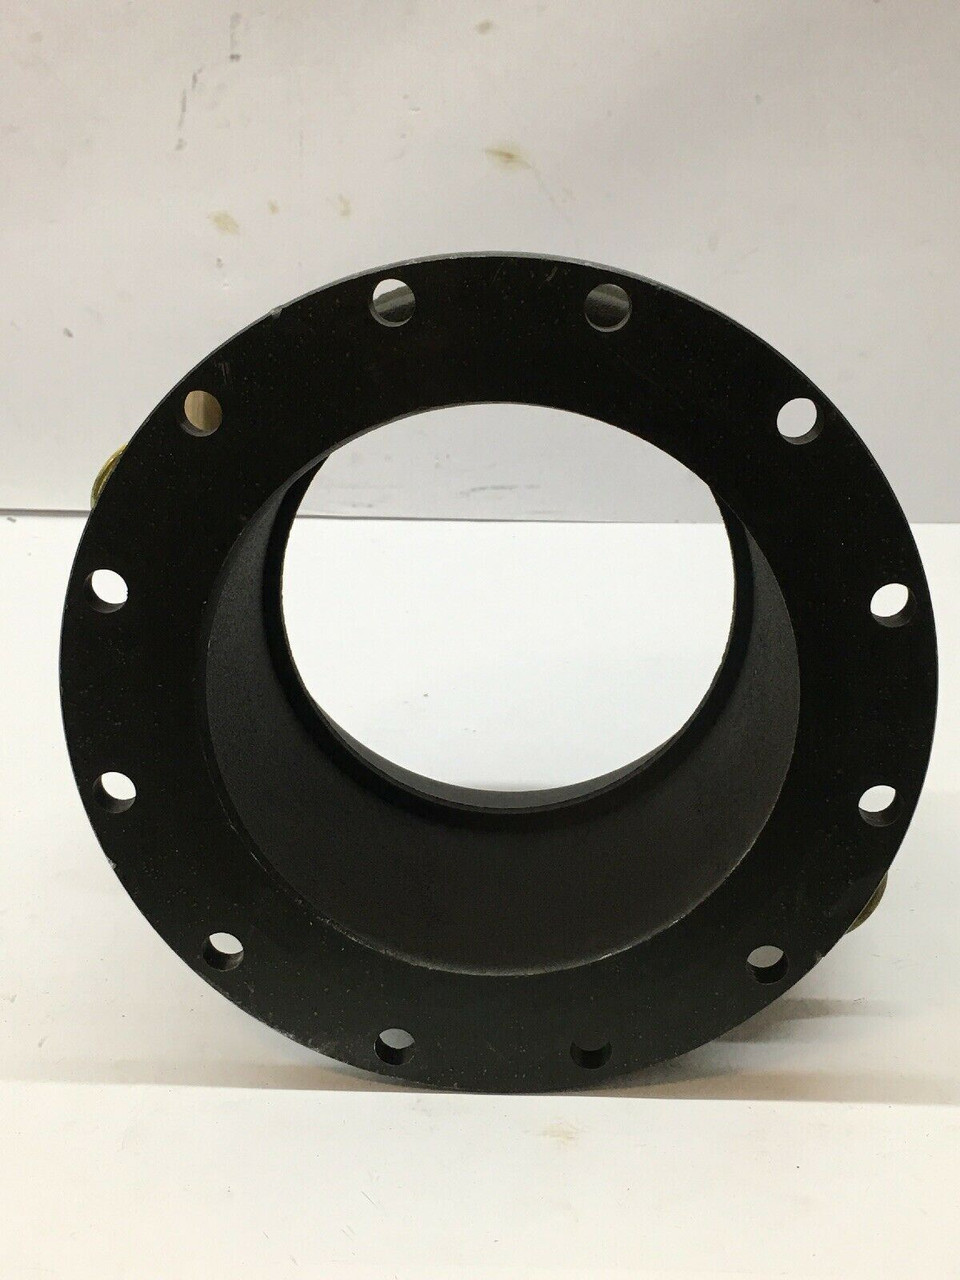 Quick Disconnect Coupling Half 633LBT6IN OPW 6" Camlock Flange Adapter